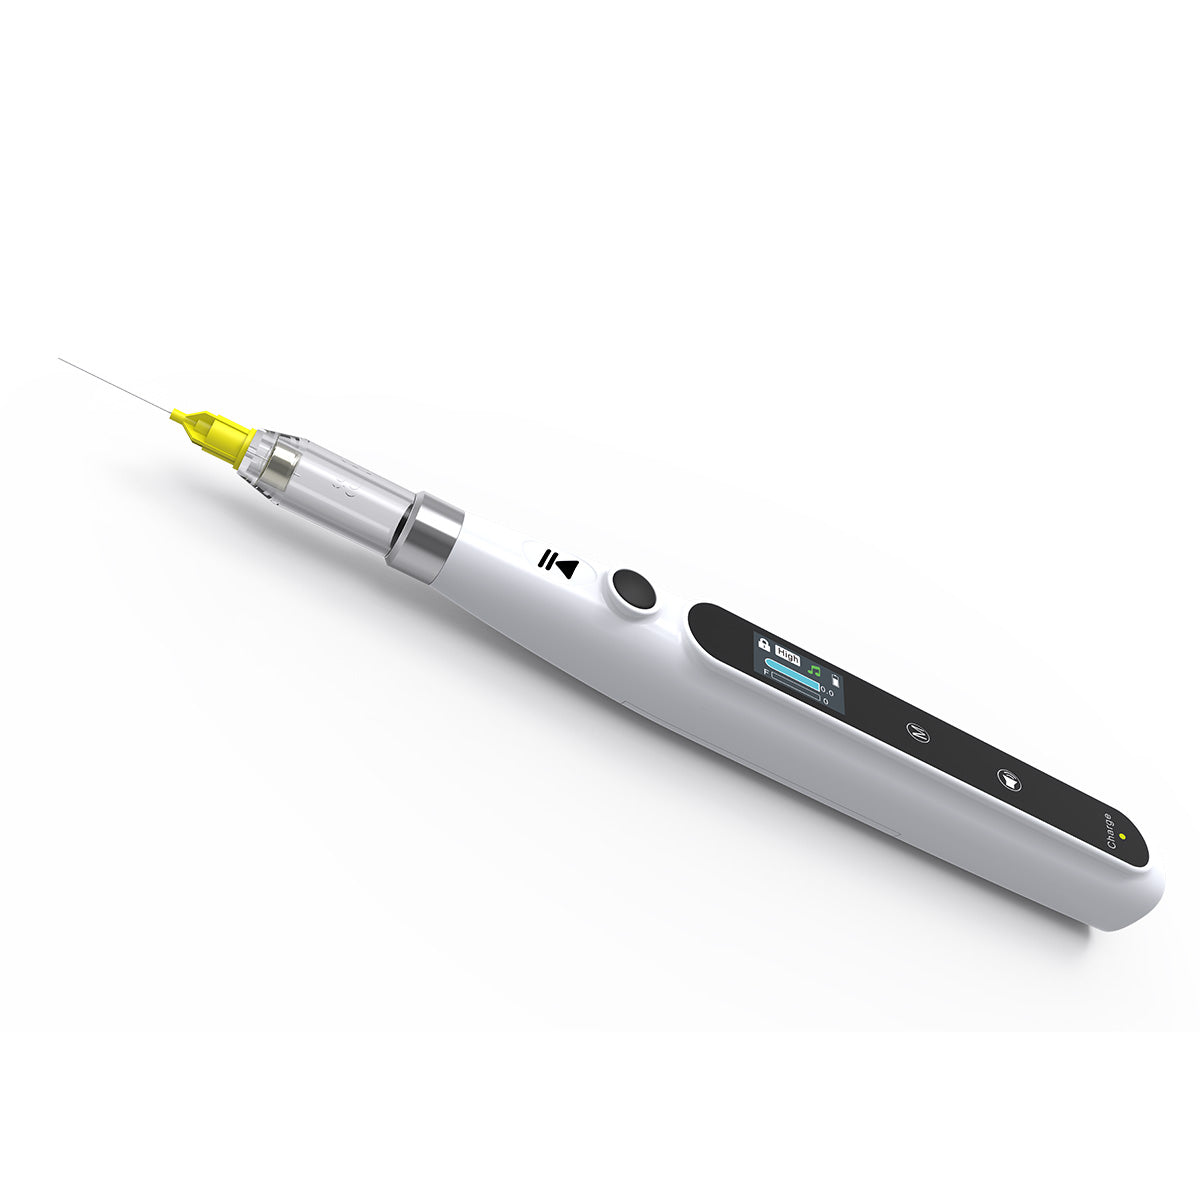 Dental Electric Professional Painless Oral Local Anesthesia Delivery Device USB Injection Pen - pairaydental.com